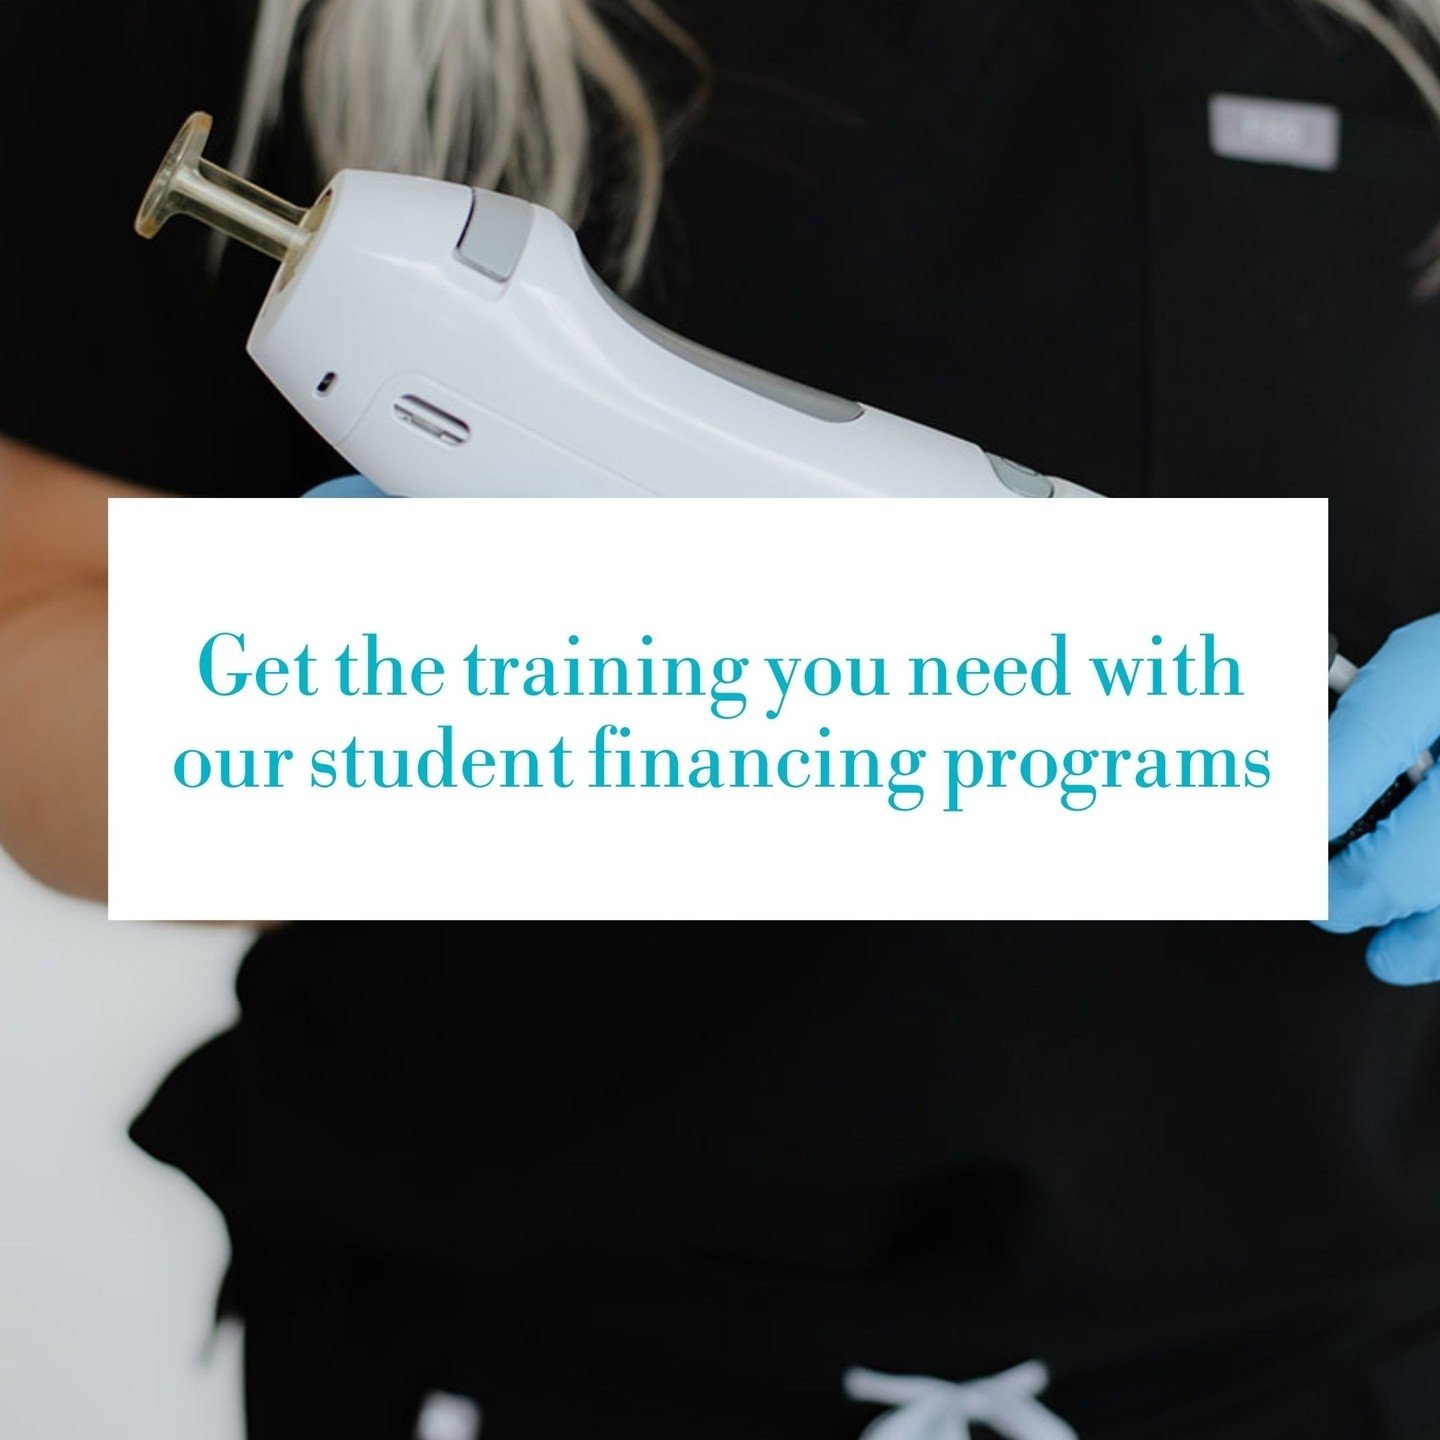 Get the training you need with ease through our student financing programs!⁠
⁠
BC Student Aid is your pathway to affording our Medical Laser Technician Program. With this option, you can pursue your dreams without financial worry.⁠
⁠
For all other pr